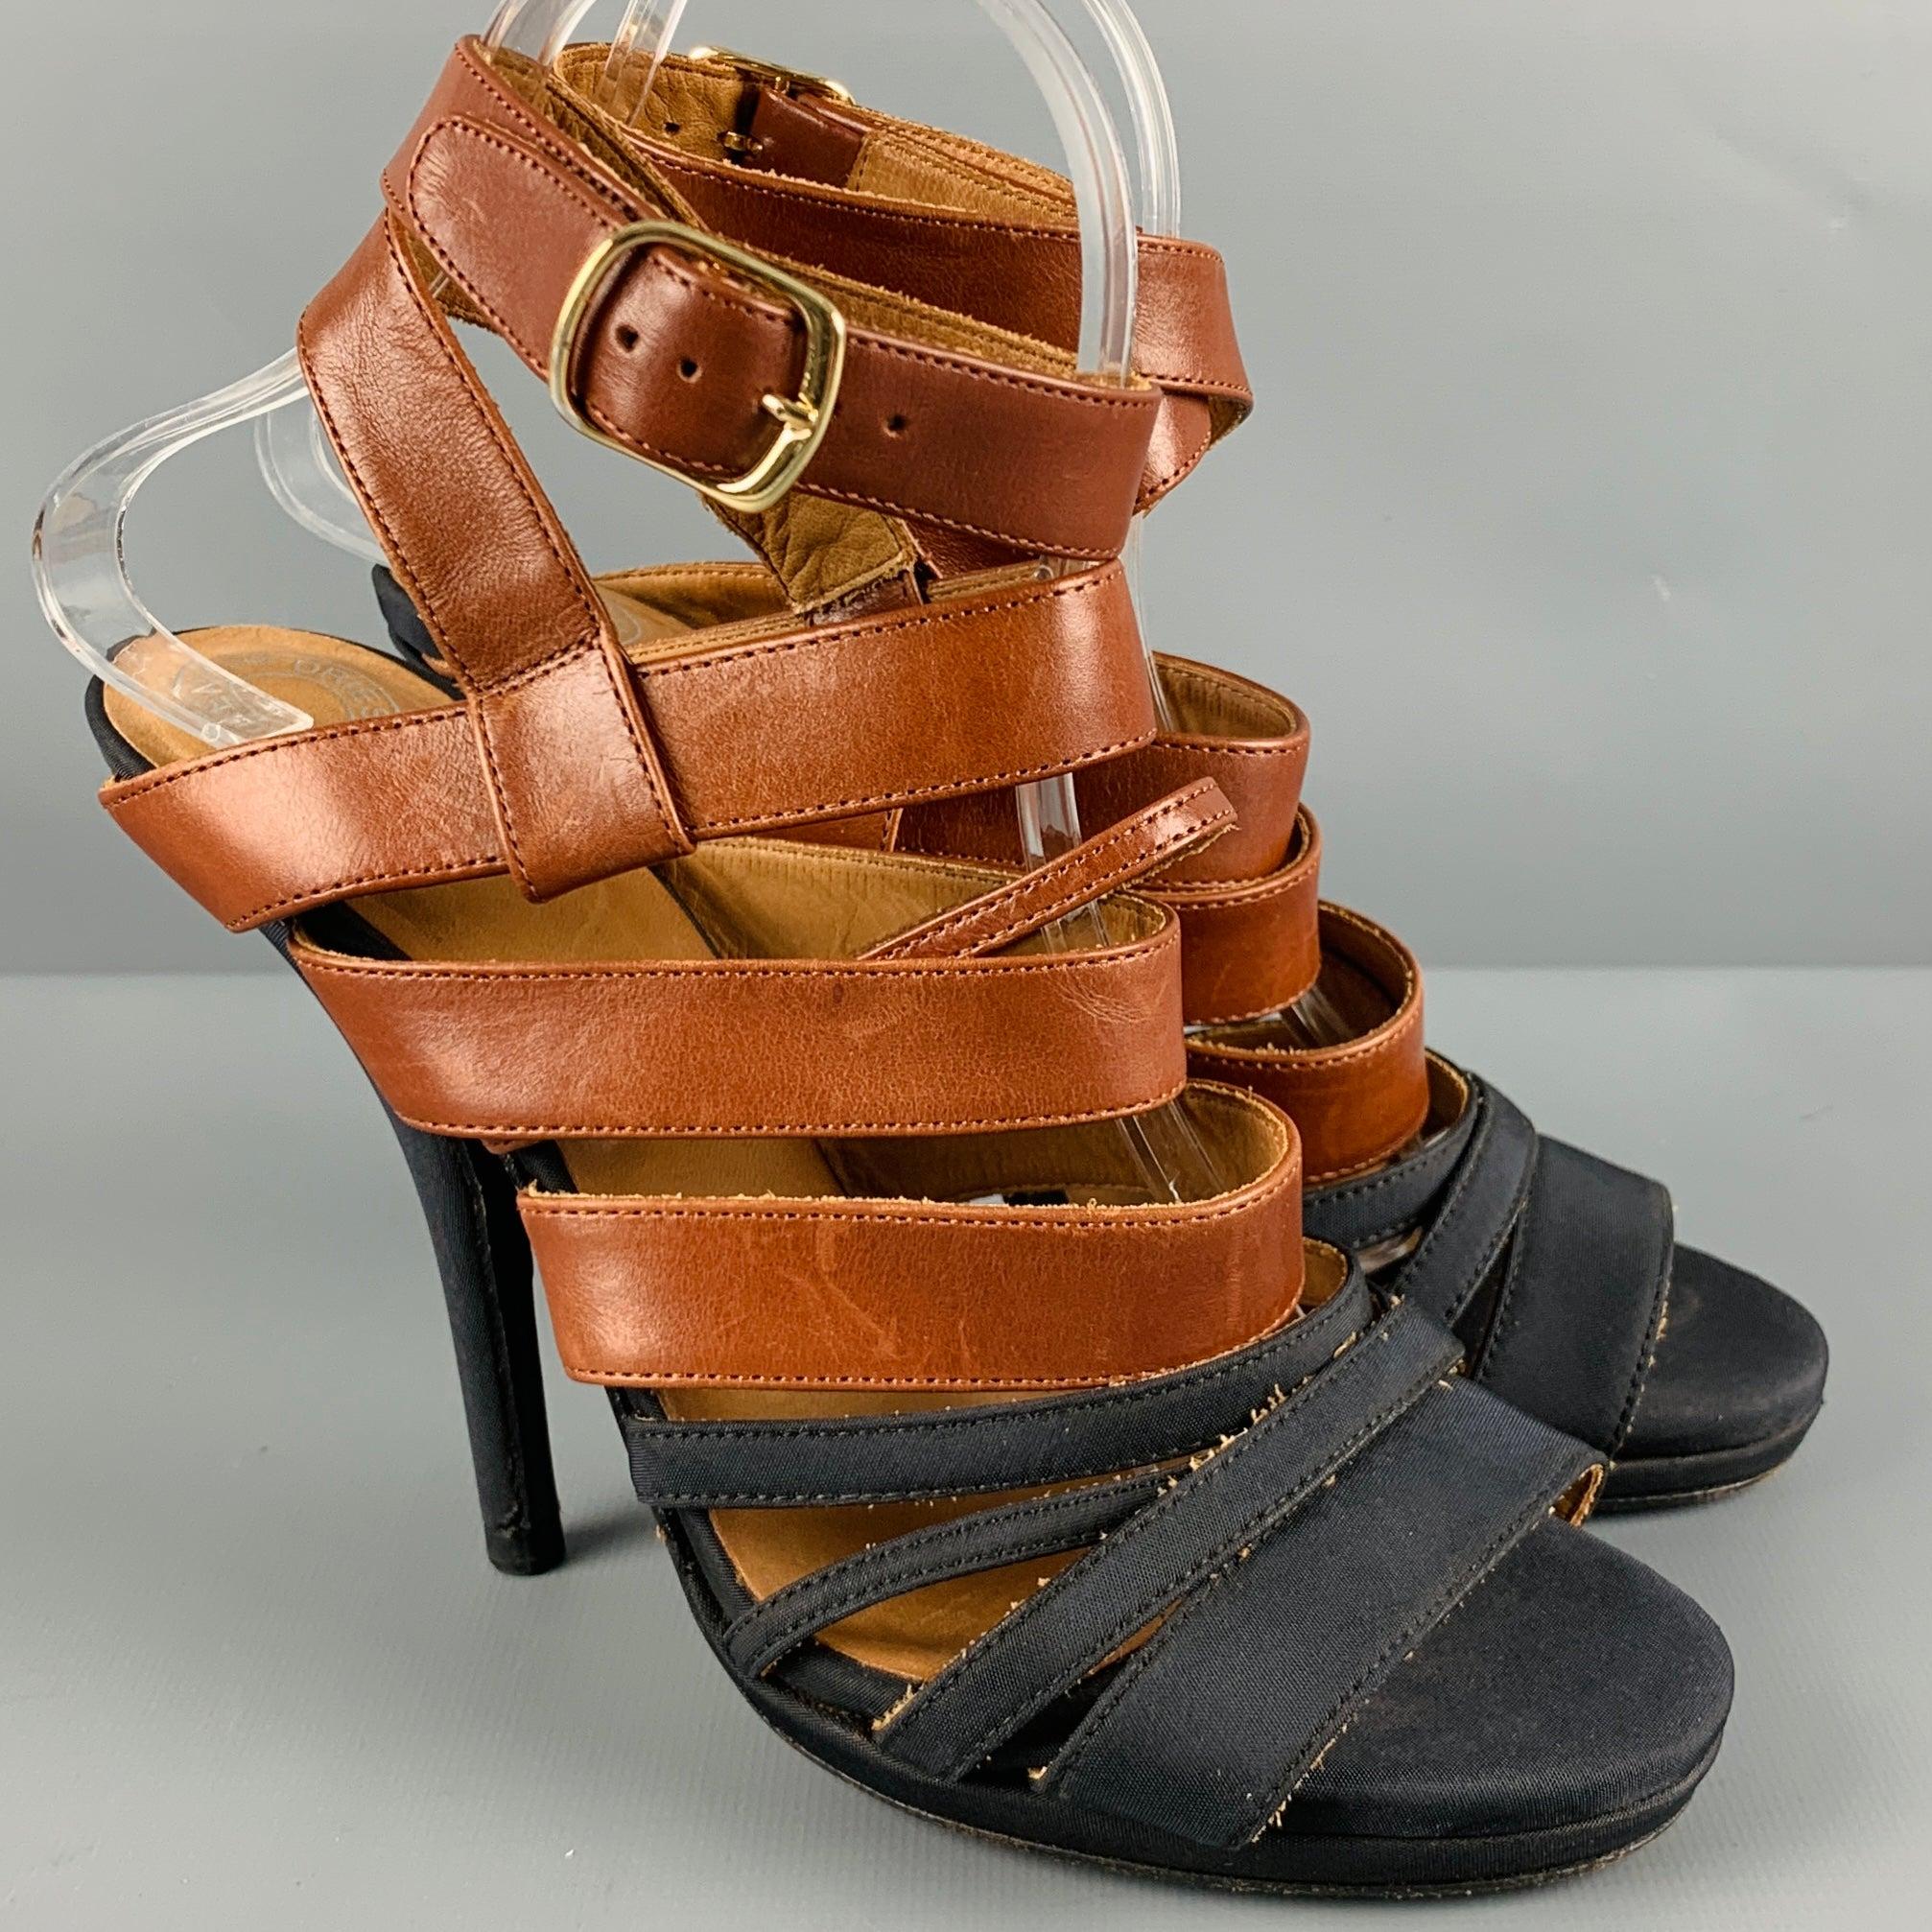 DRIES VAN NOTEN sandals
in a brown leather and black fabric featuring a two-tone strappy style, platform, and ankle strap buckle closure.Excellent Pre-Owned Condition. 

Marked:   38 

Measurements: 
  Platform: 1 cm.Heel: 4.5 inches 
  
  
